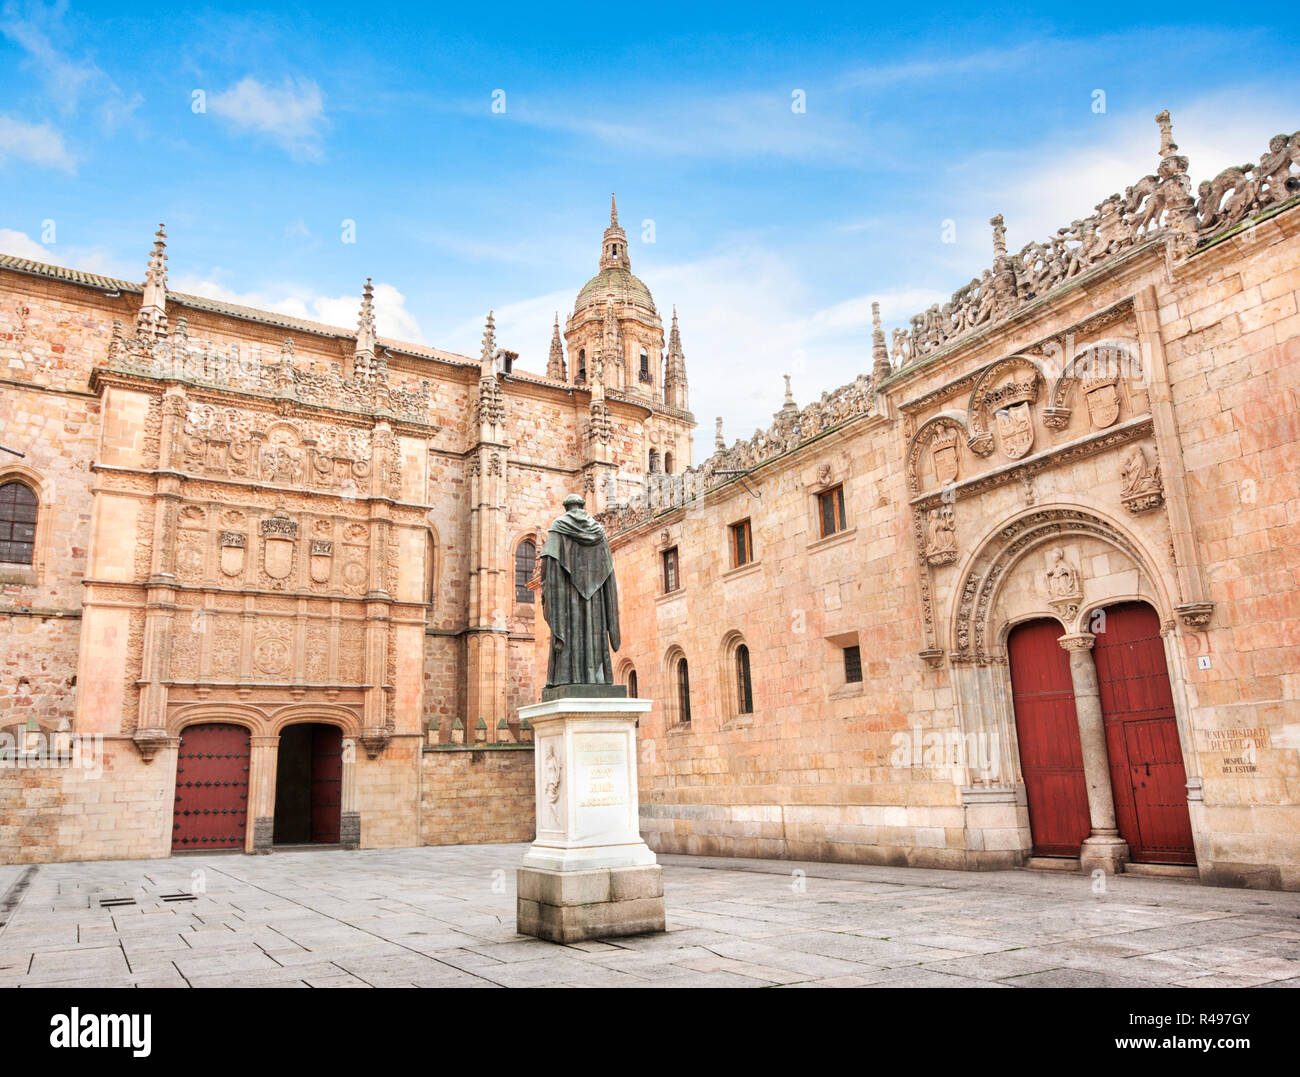 Beautiful view of famous University of Salamanca, the oldest university in Spain and one of the oldest in Europe, in Salamanca, Castilla y Leon region Stock Photo